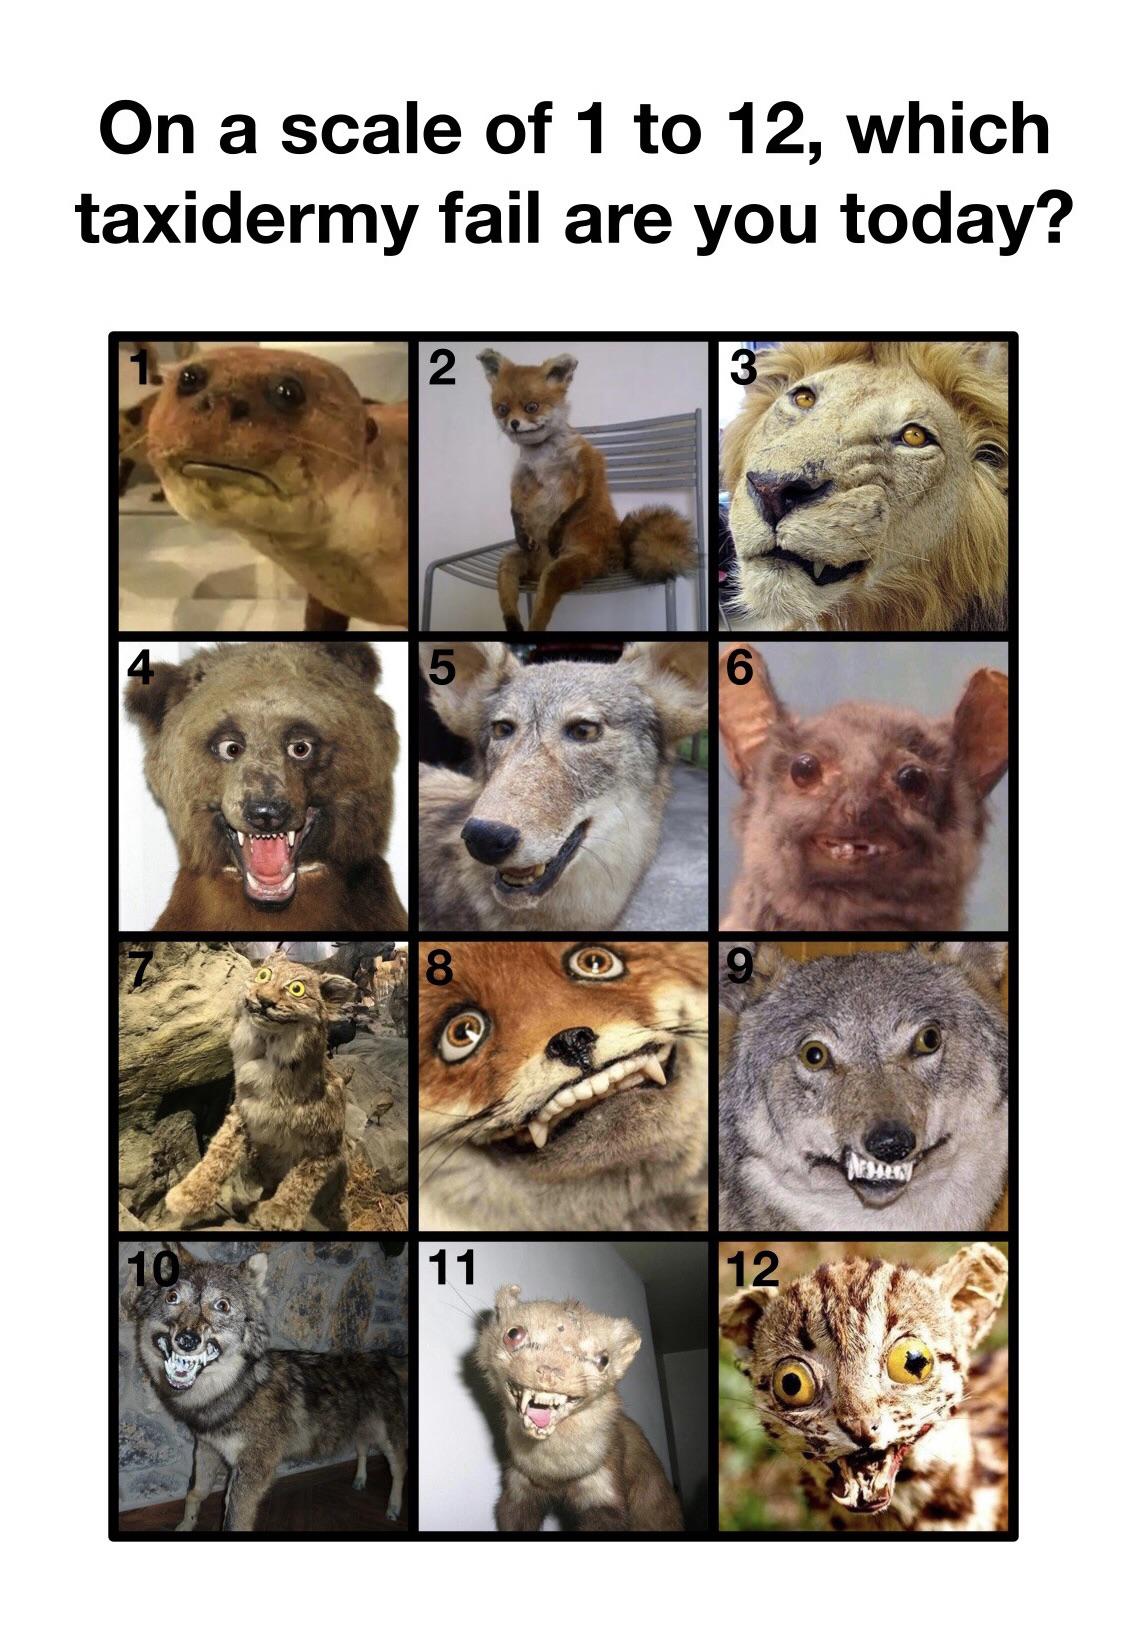 fauna - On a scale of 1 to 12, which taxidermy fail are you today? 2 3 5 6 8 0 10 11 12